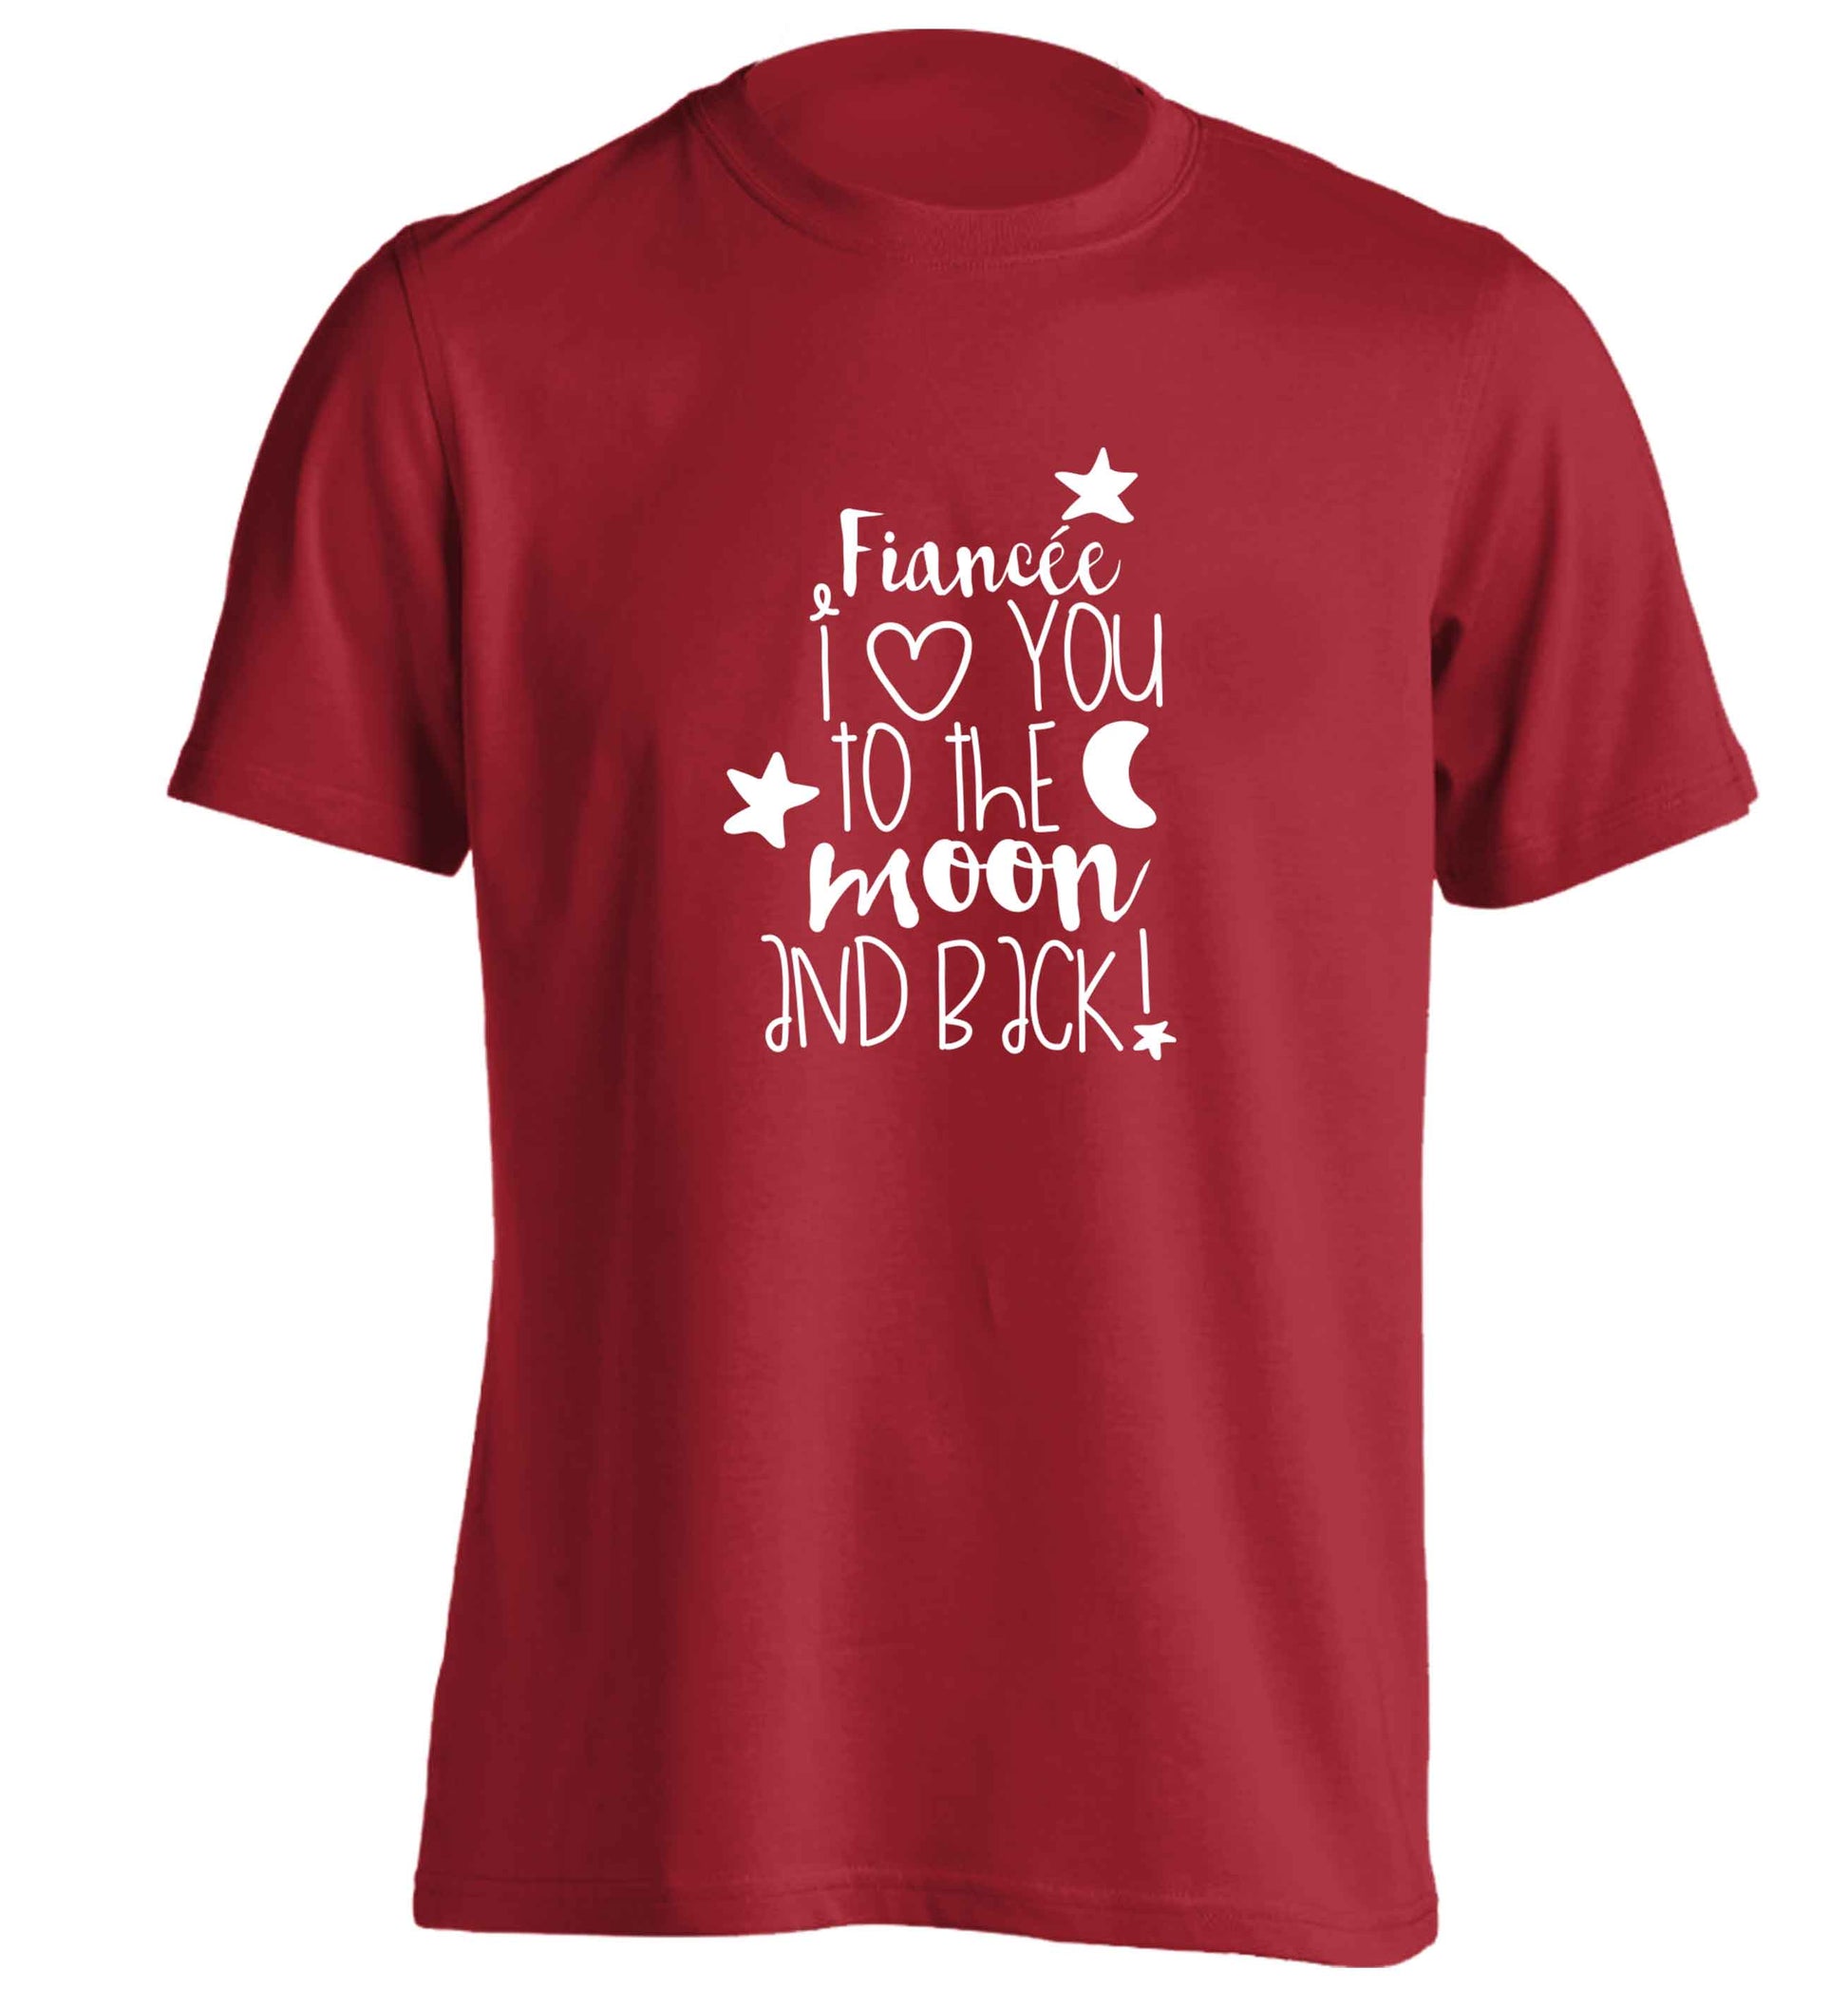 Fianc√©e I love you to the moon and back adults unisex red Tshirt 2XL